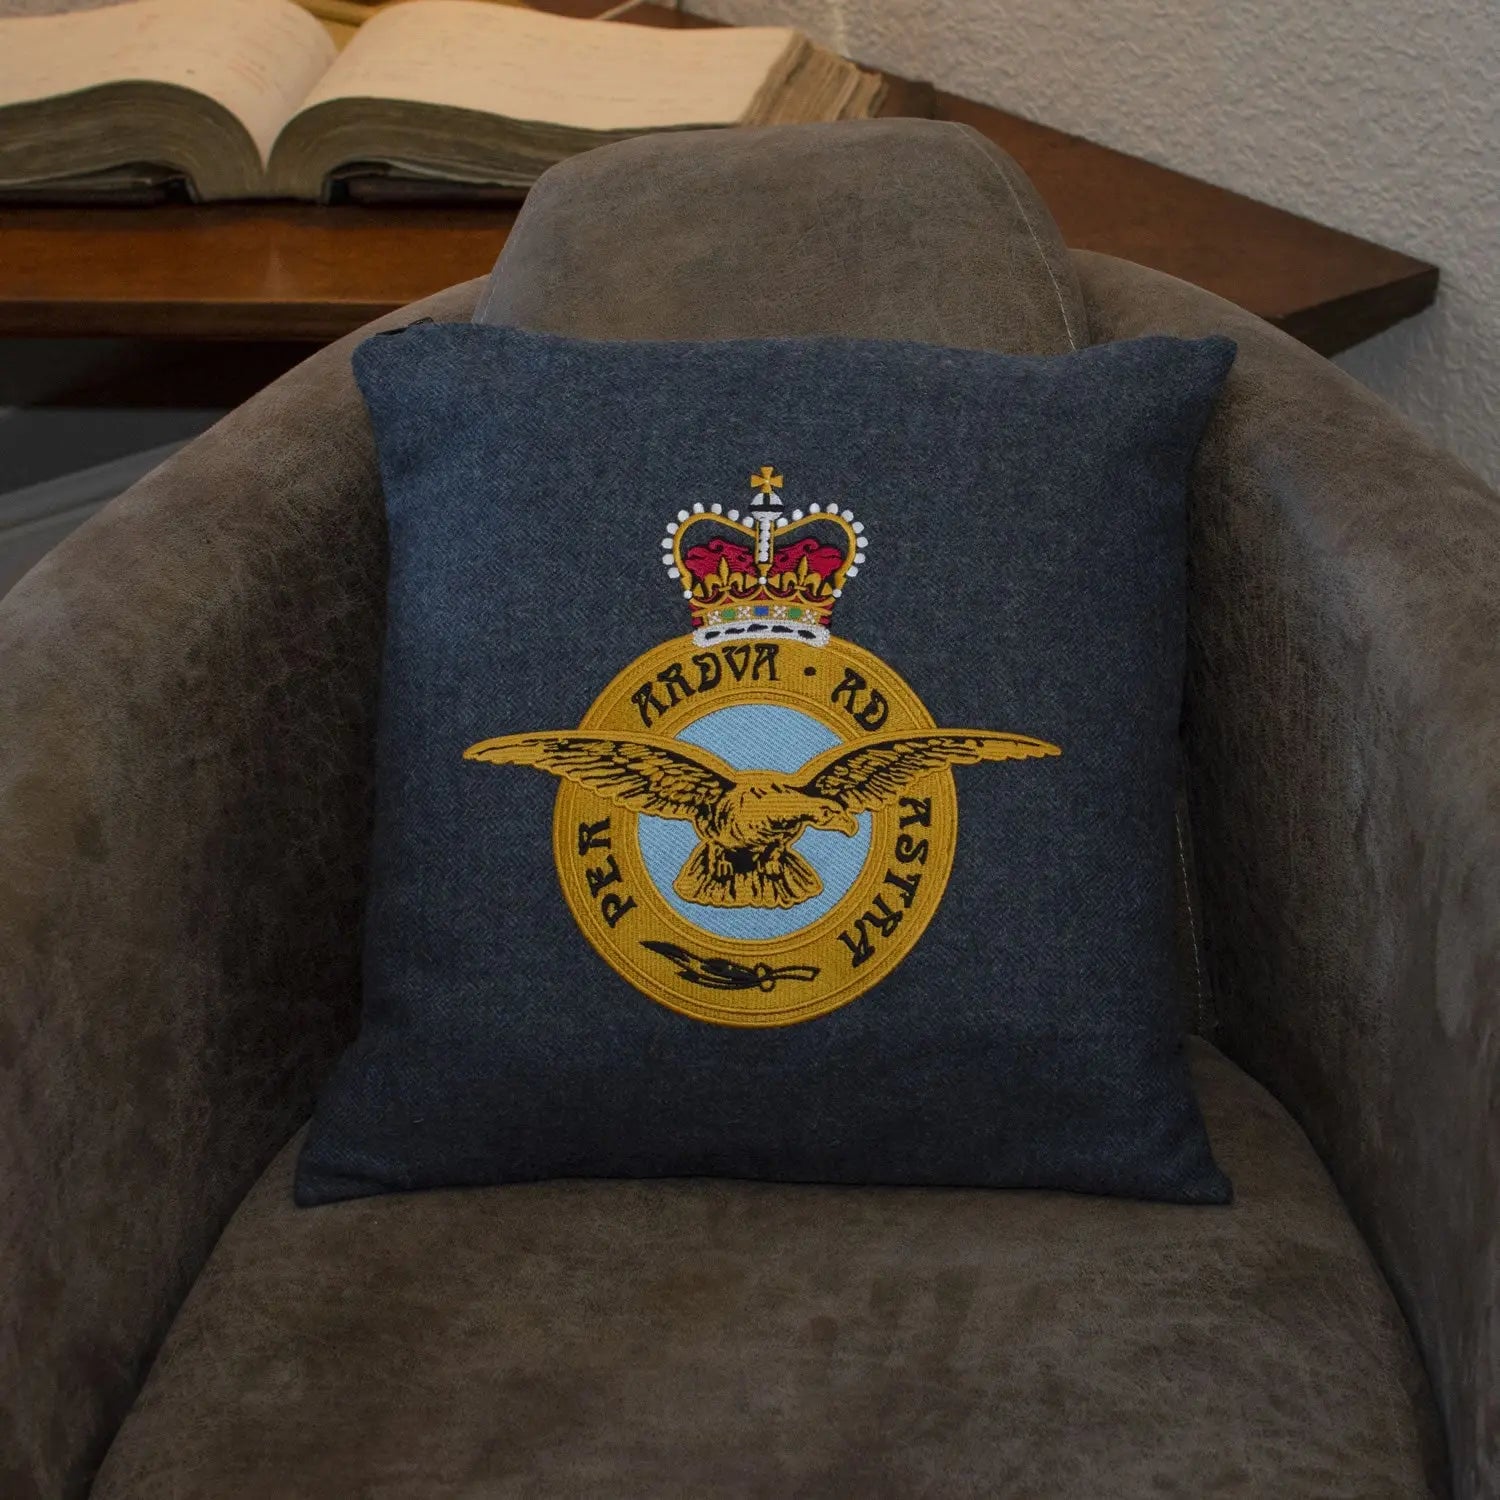 Royal Air Force (RAF) Embroidered Military Cushion Cover wyedean